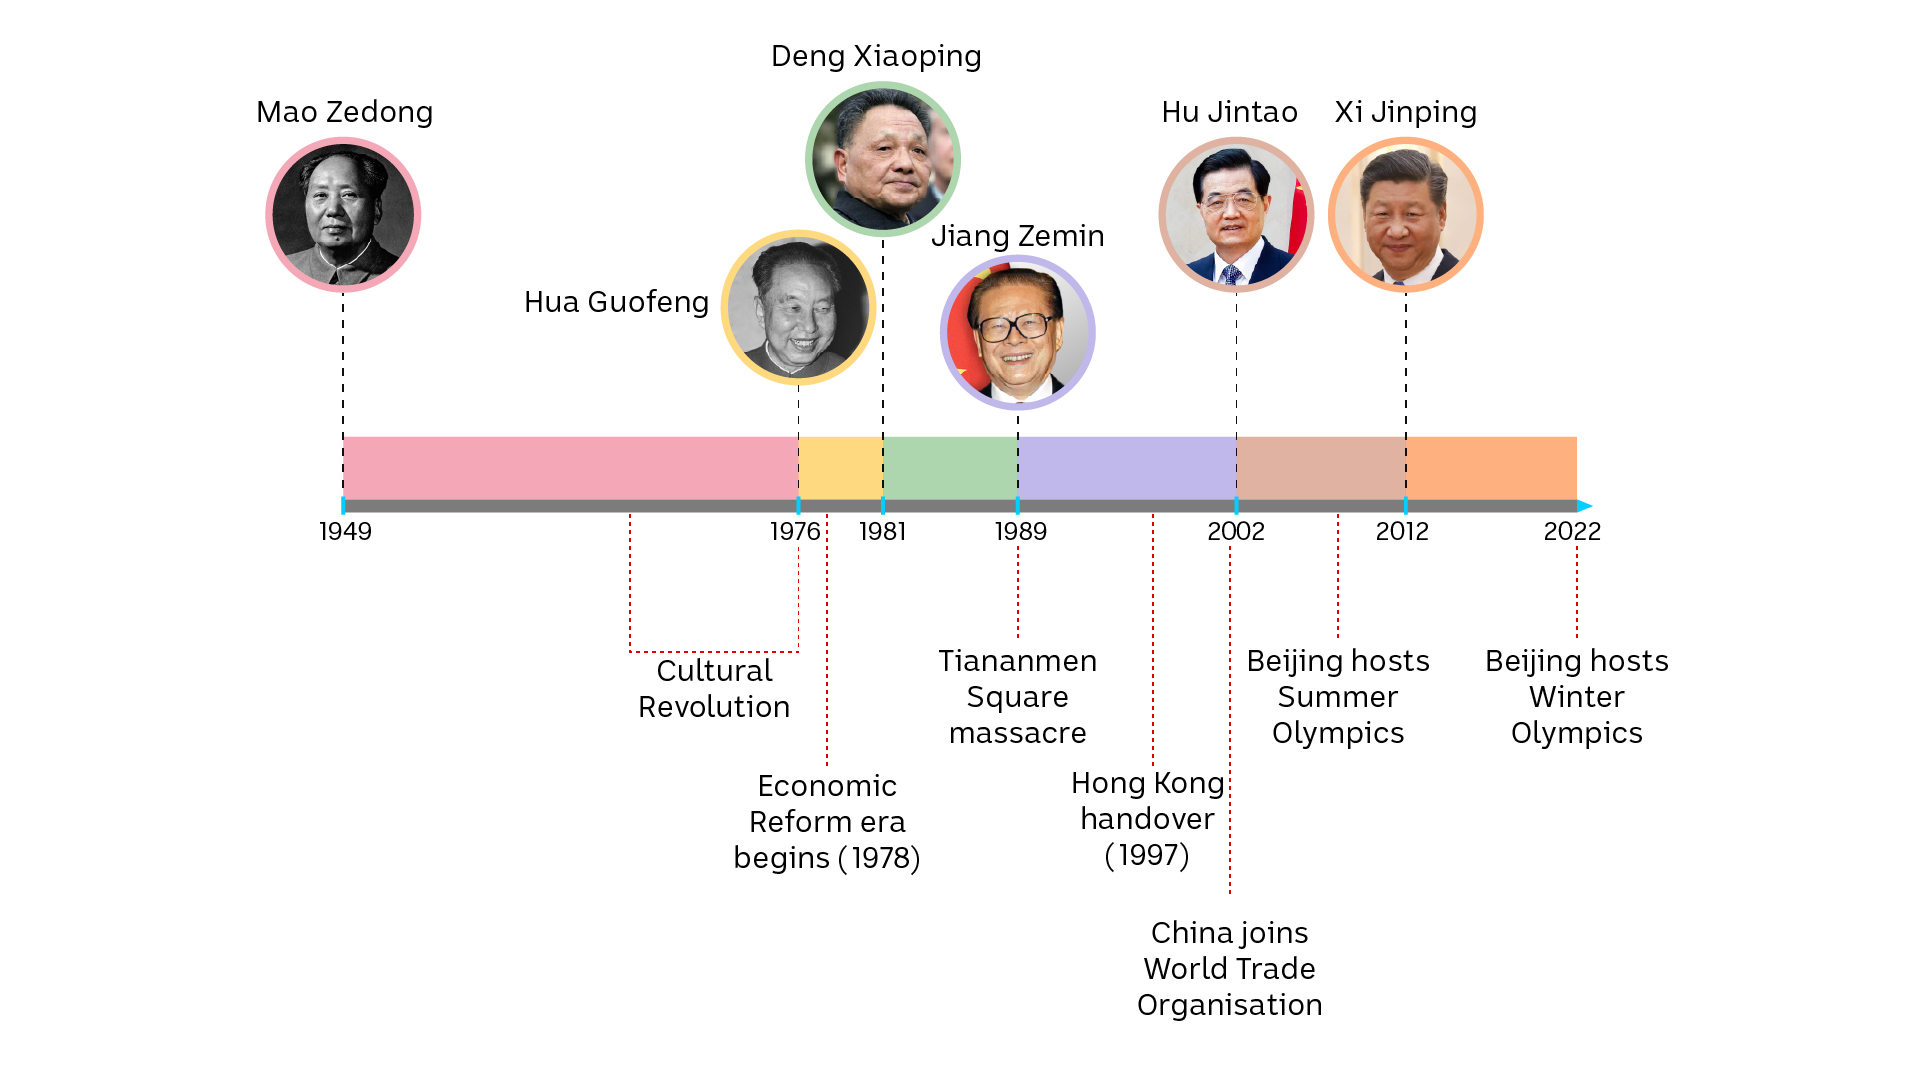 A timeline of China's top officials and their major policies